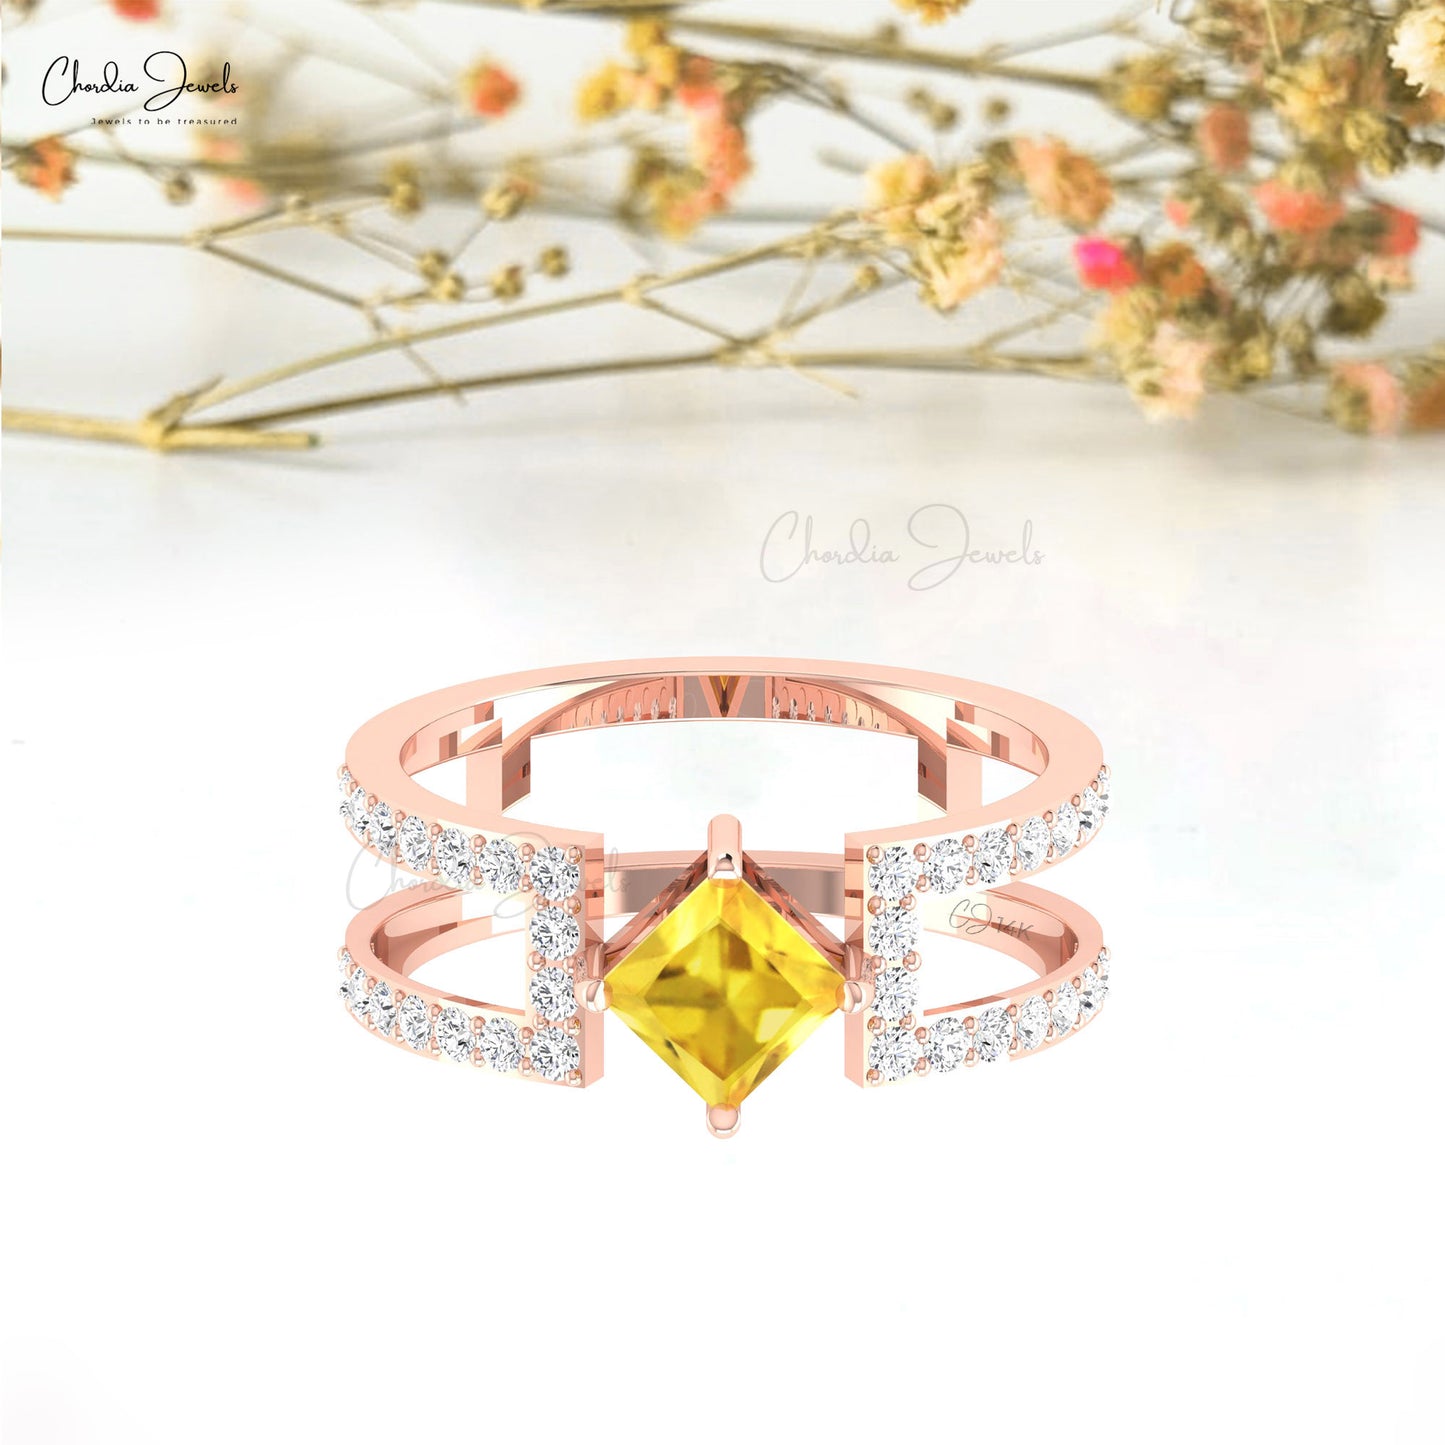 Prong Set 0.85ct Yellow Sapphire Dual Band Ring 14k Real Gold Diamond Accents Anniversary Ring